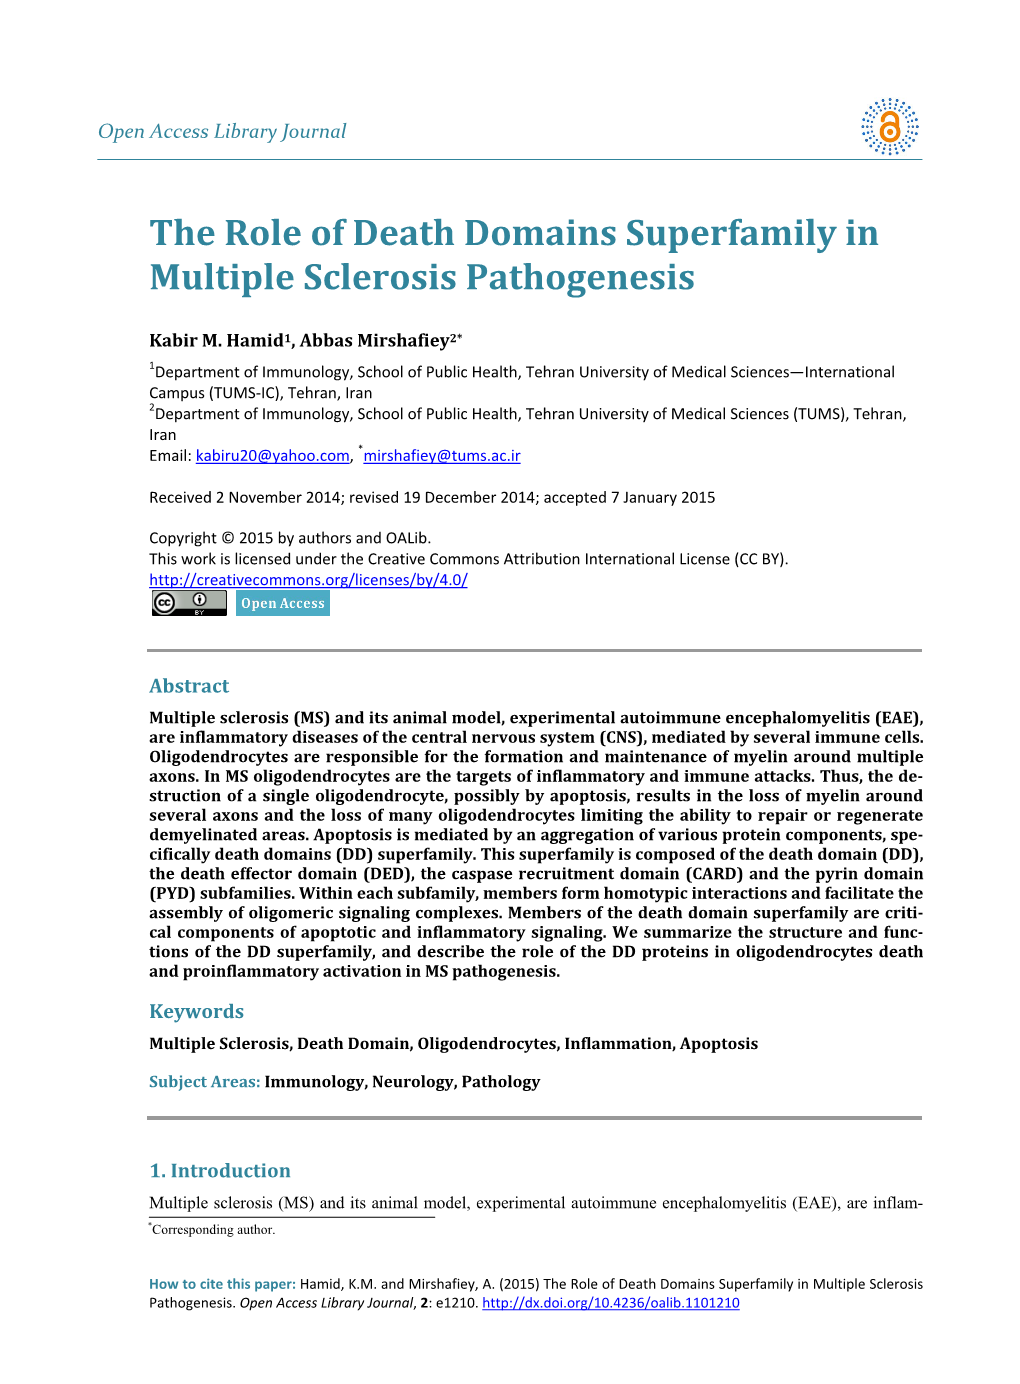 The Role of Death Domains Superfamily in Multiple Sclerosis Pathogenesis